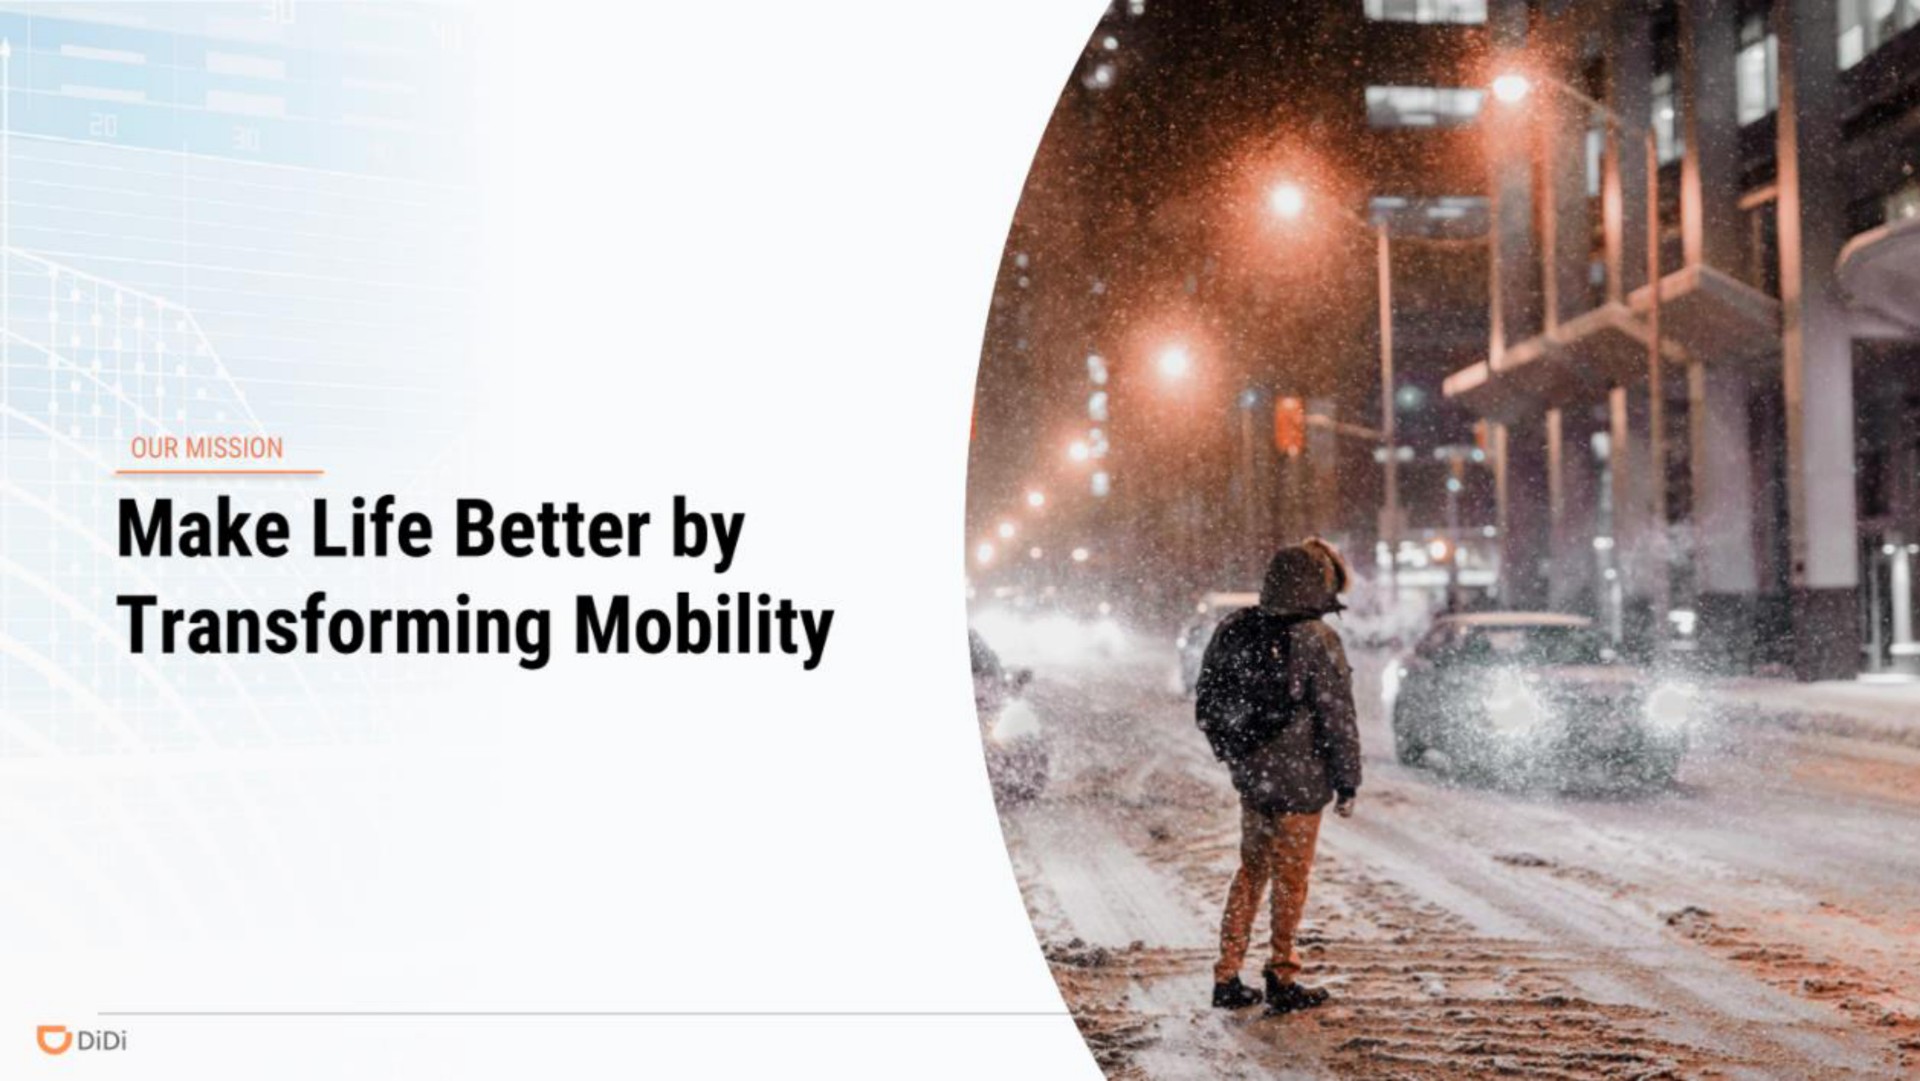 make life better by transforming mobility | DiDi